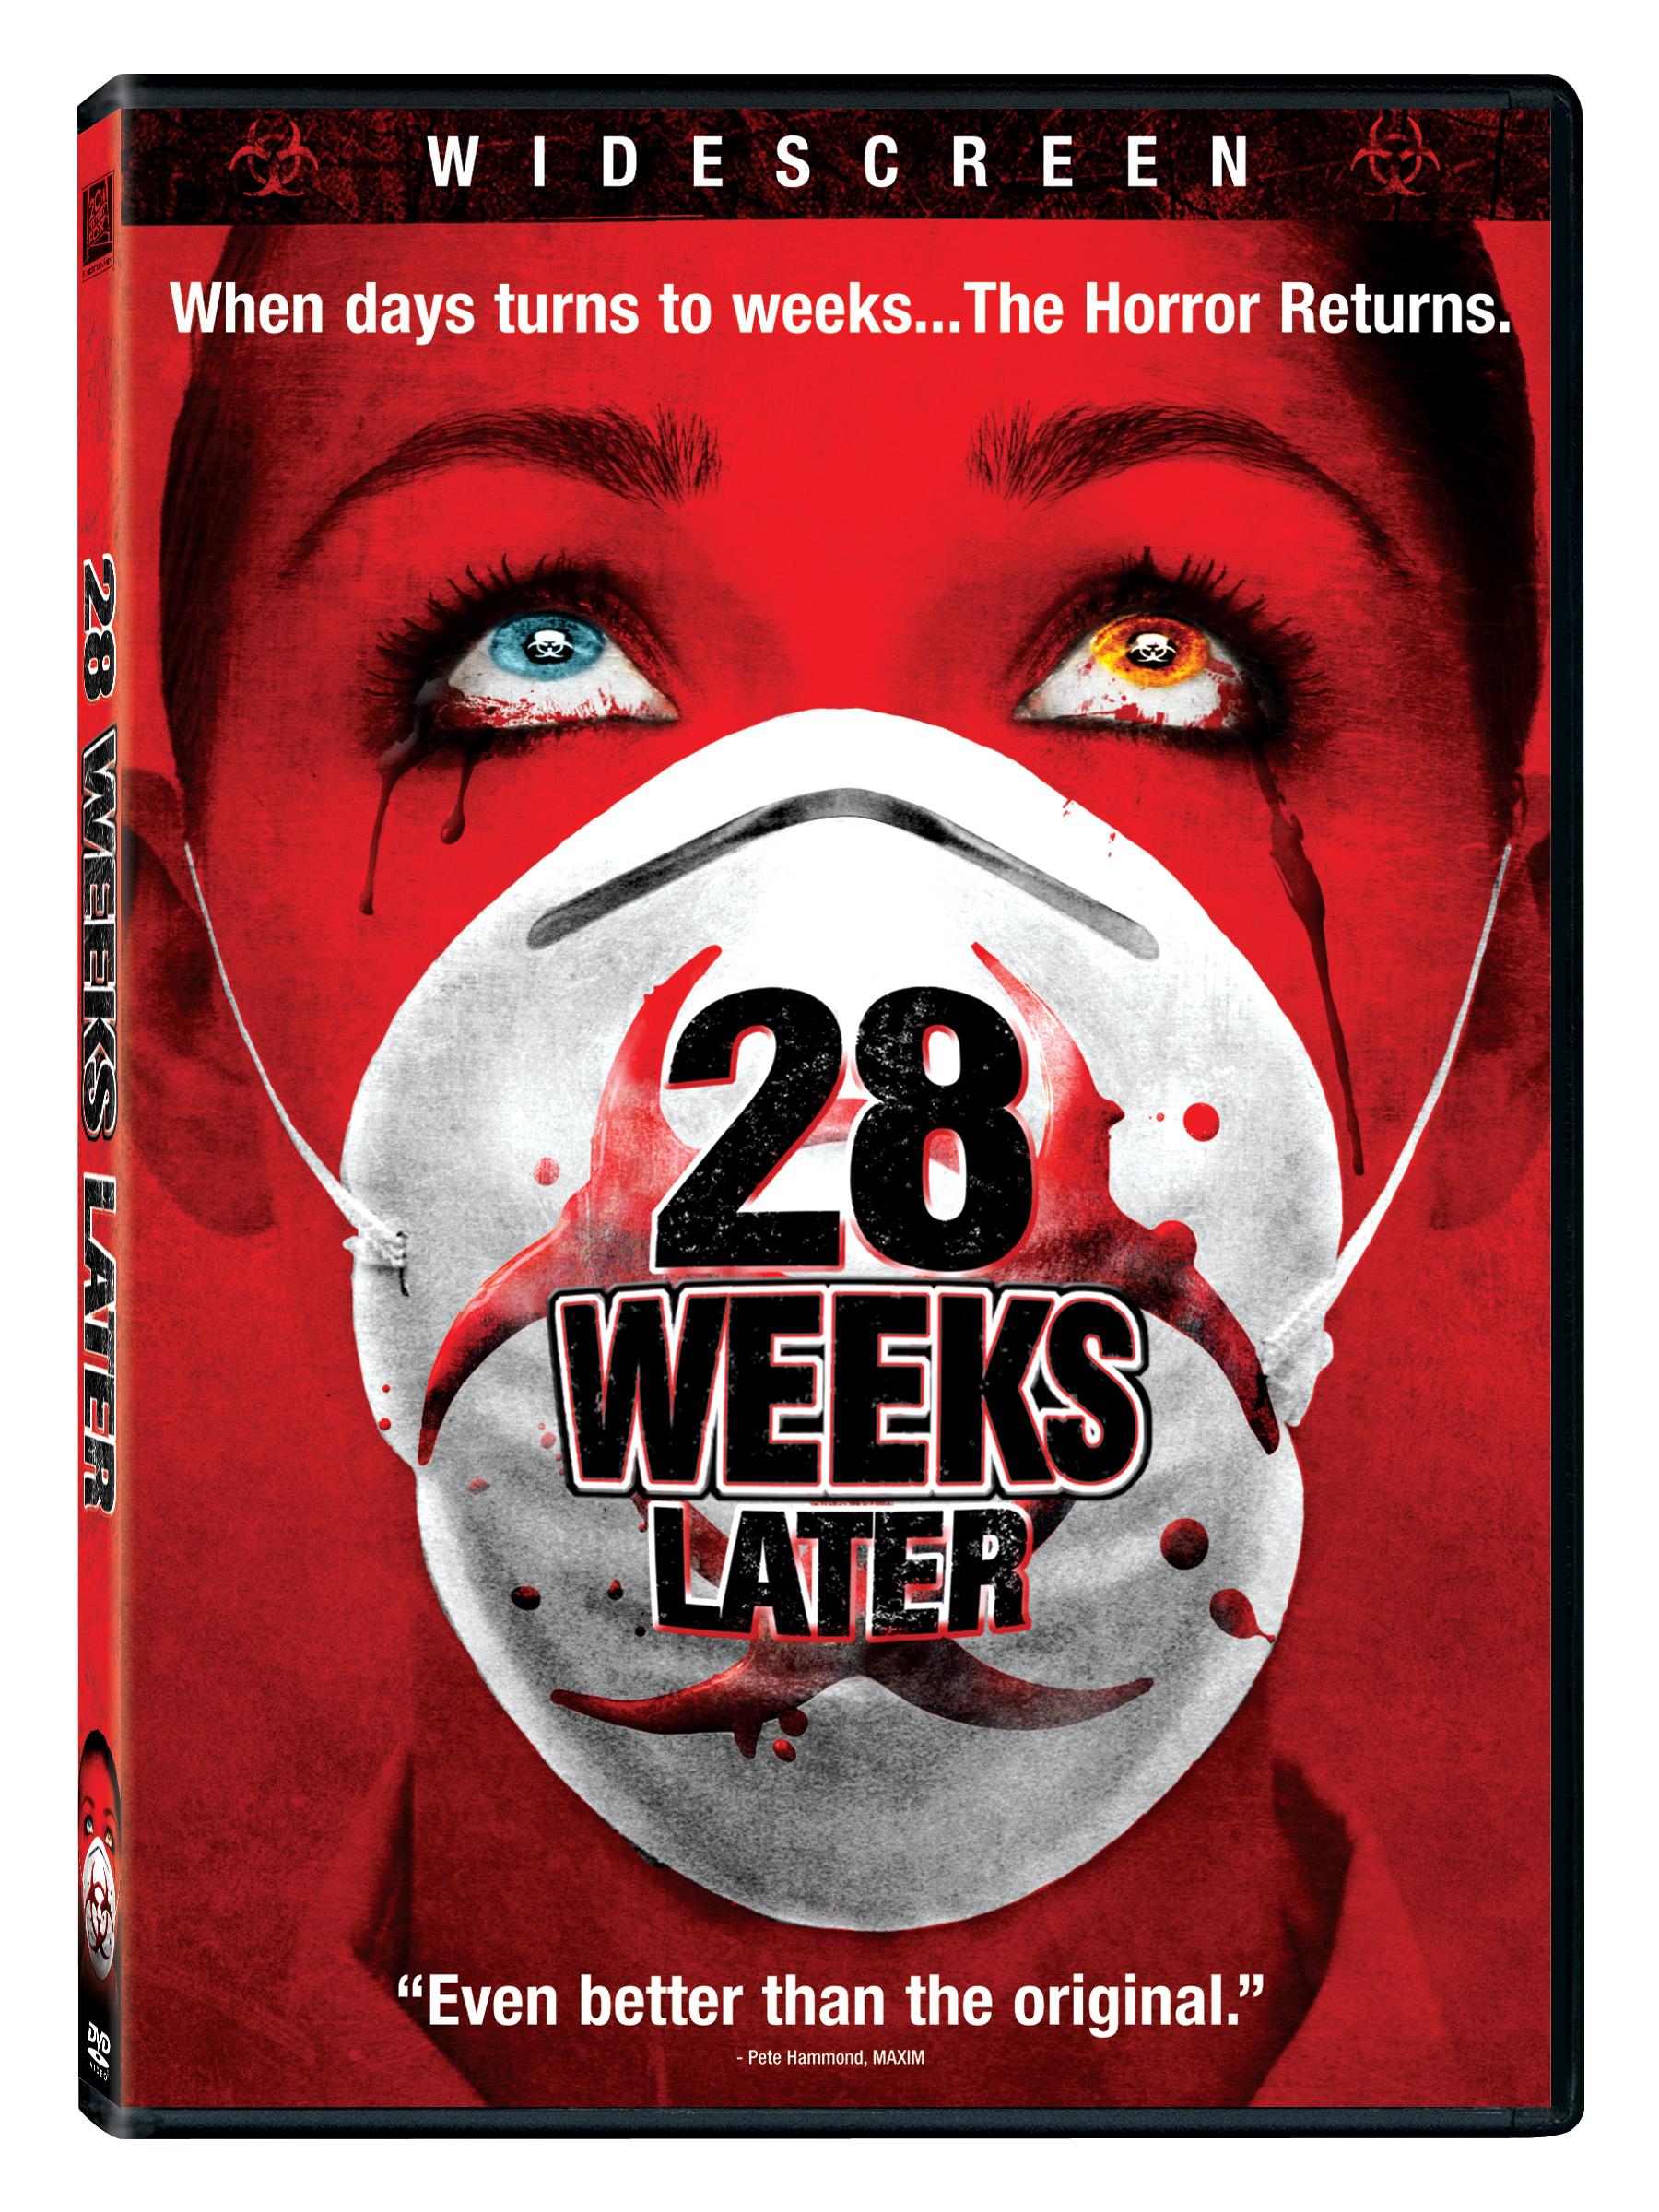 Amazing 28 Weeks Later Pictures & Backgrounds